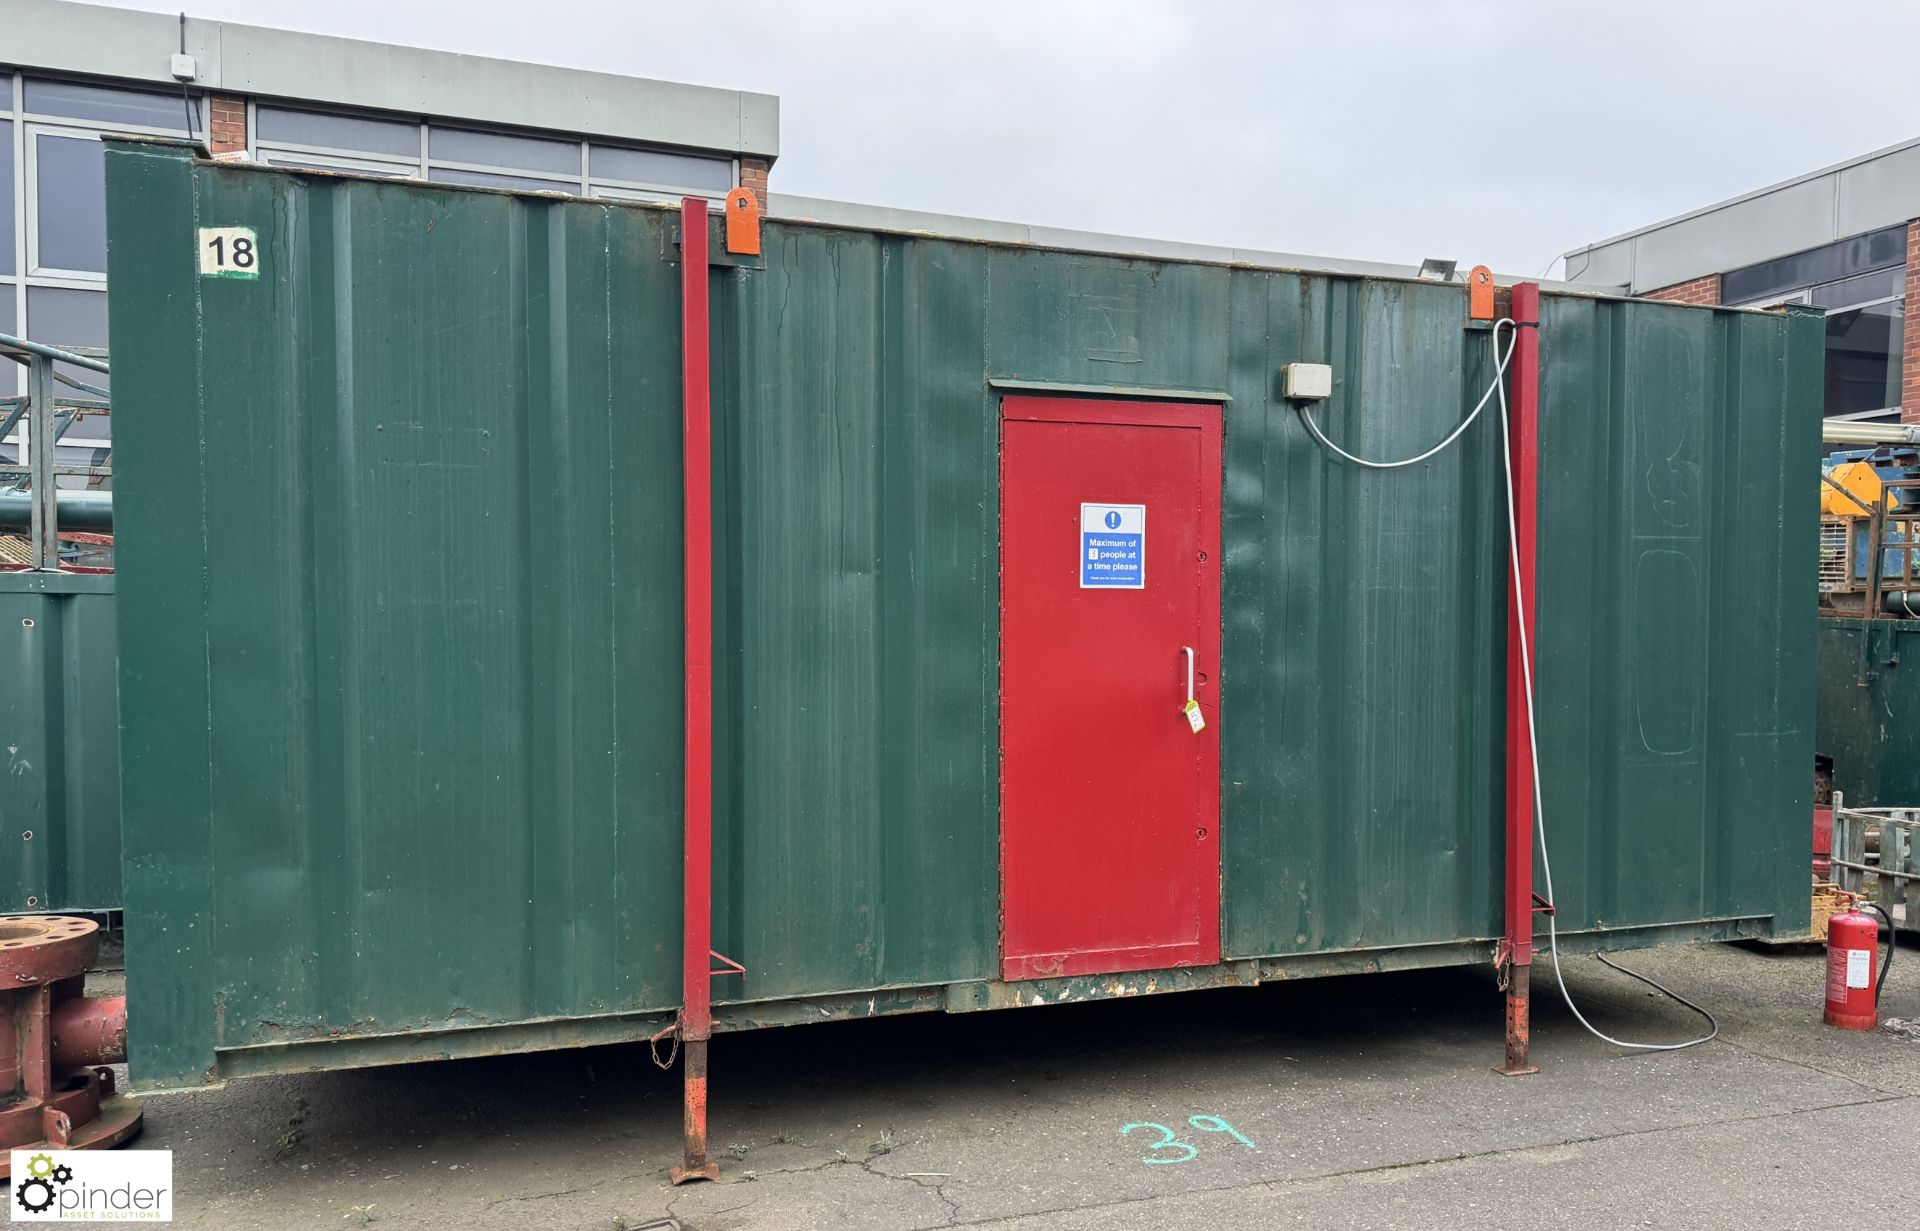 Secure Jackleg Office Cabin, 6250mm x 2700mm x 2600mm (not including legs), with electric wall